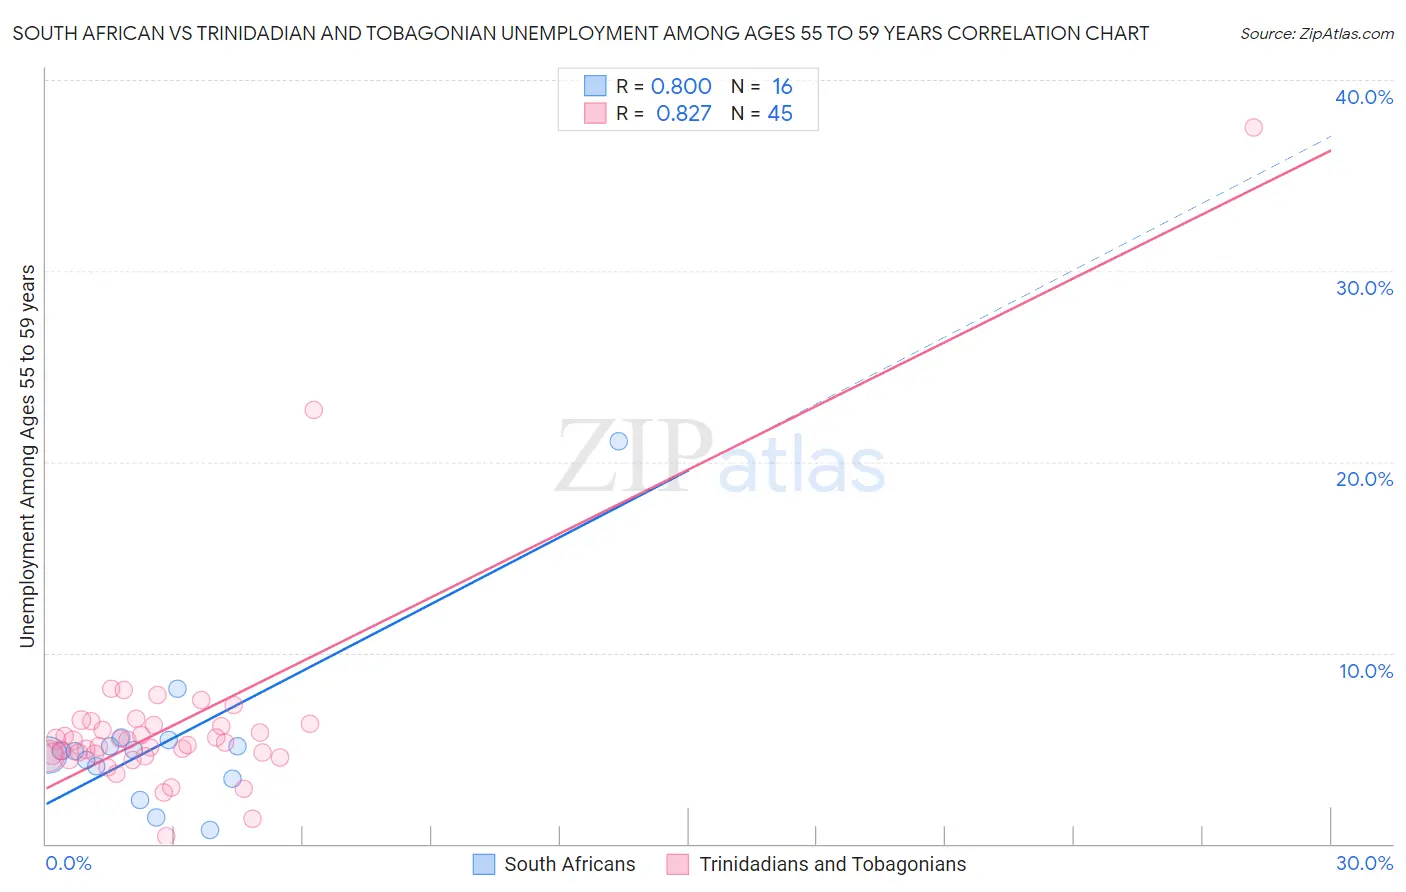 South African vs Trinidadian and Tobagonian Unemployment Among Ages 55 to 59 years